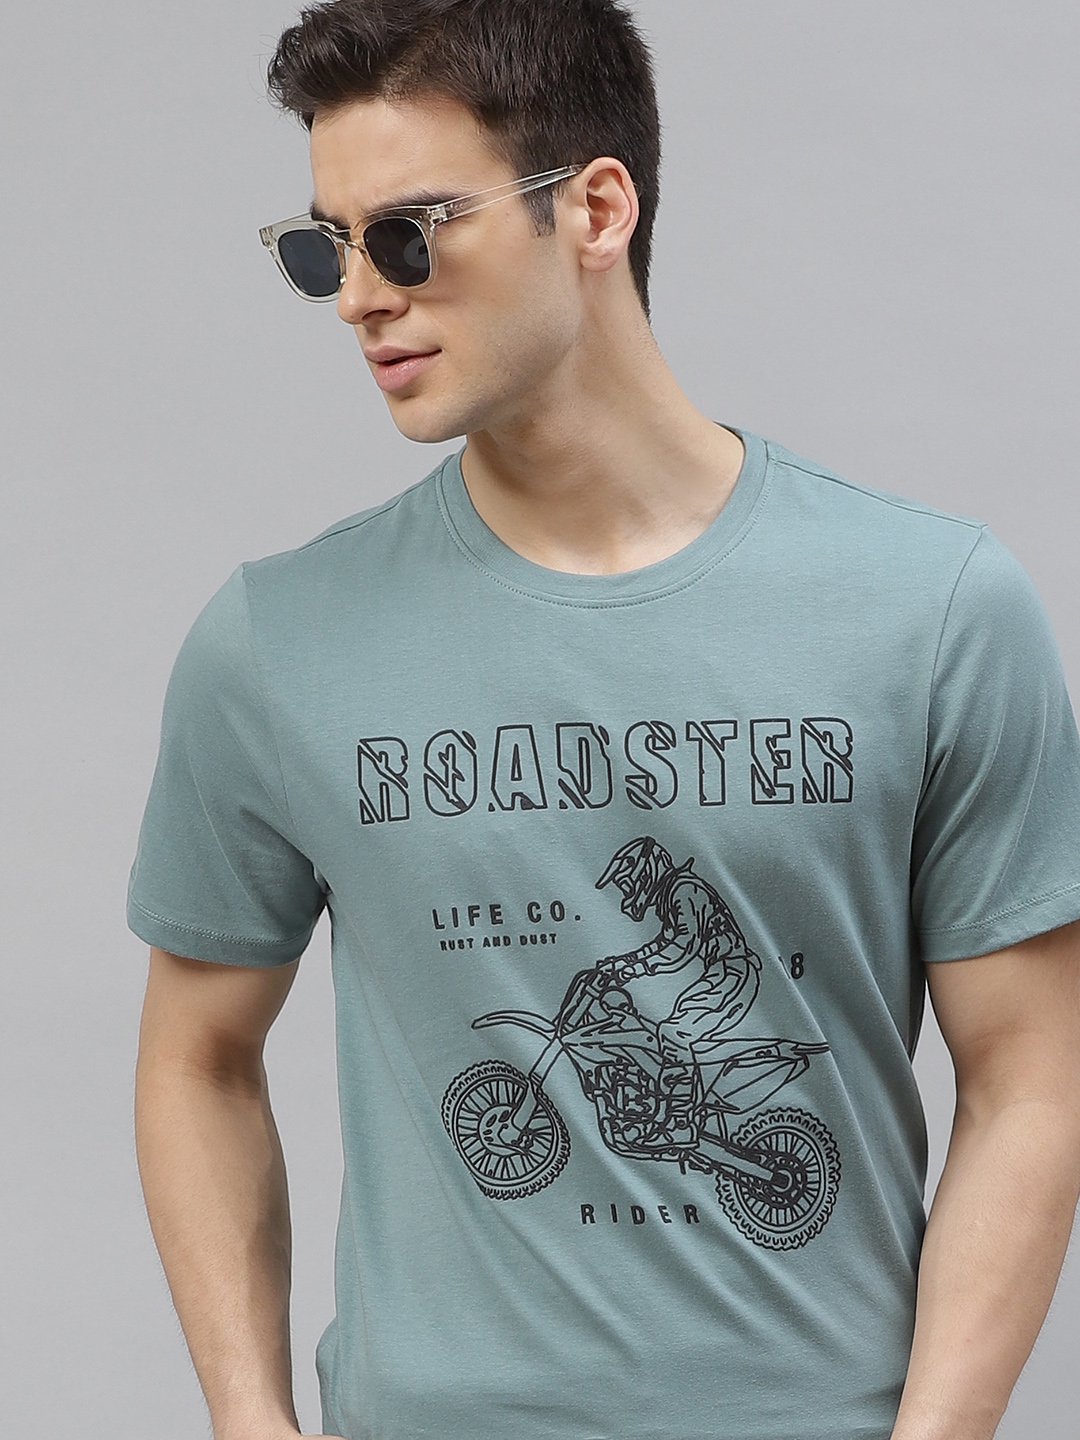 Buy The Roadster Lifestyle Co Men Blue Pure Cotton Printed Round Neck Pure Cotton T Shirt